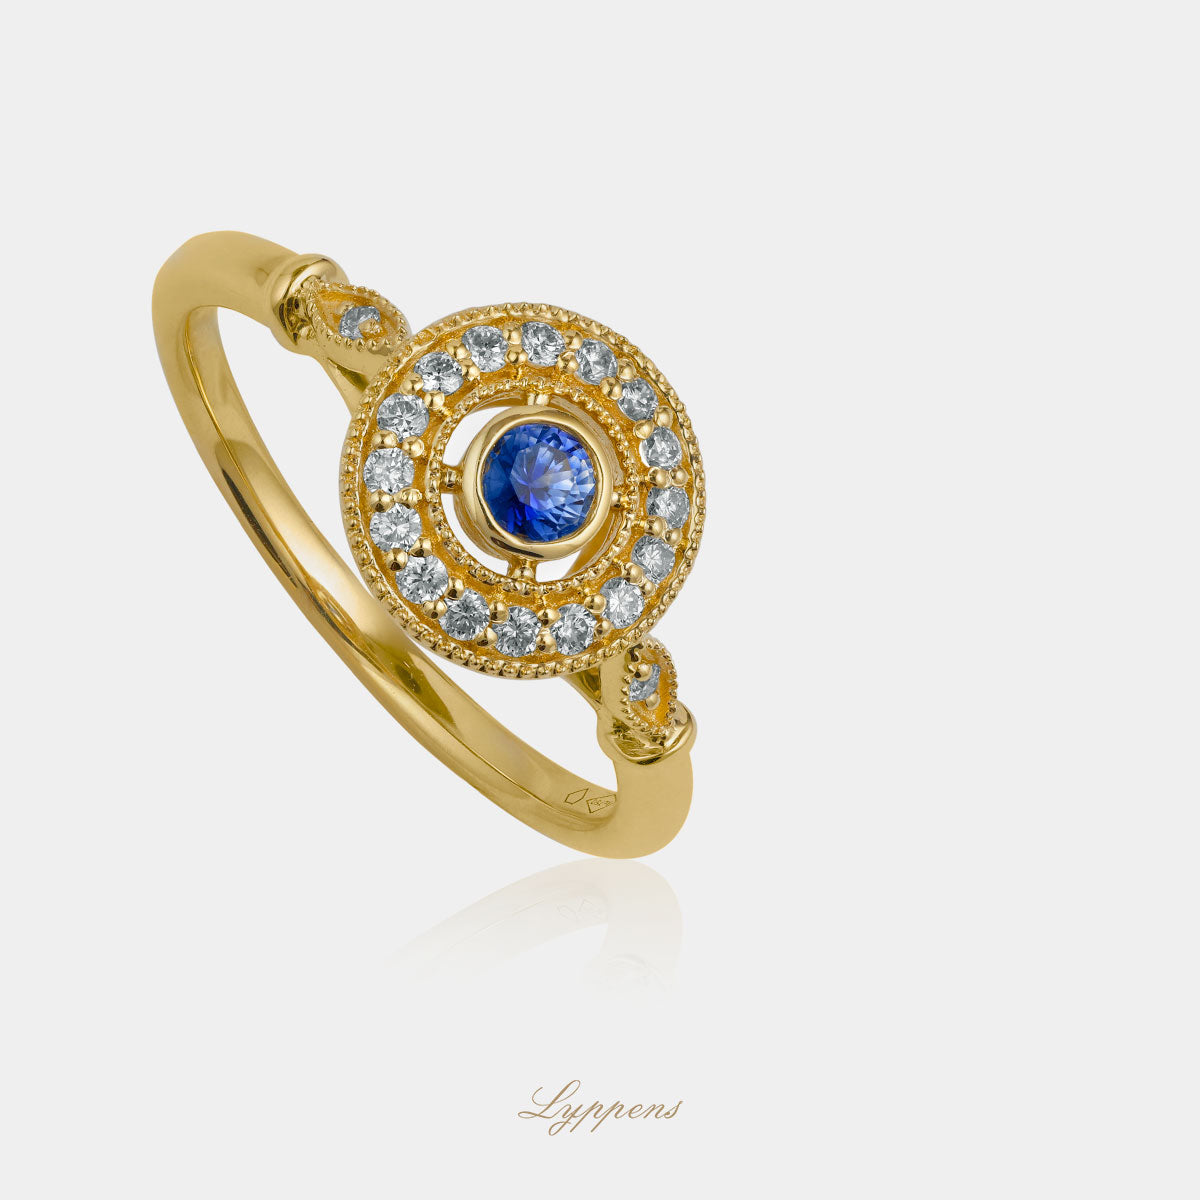 Yellow gold art deco style ring with sapphire and diamond